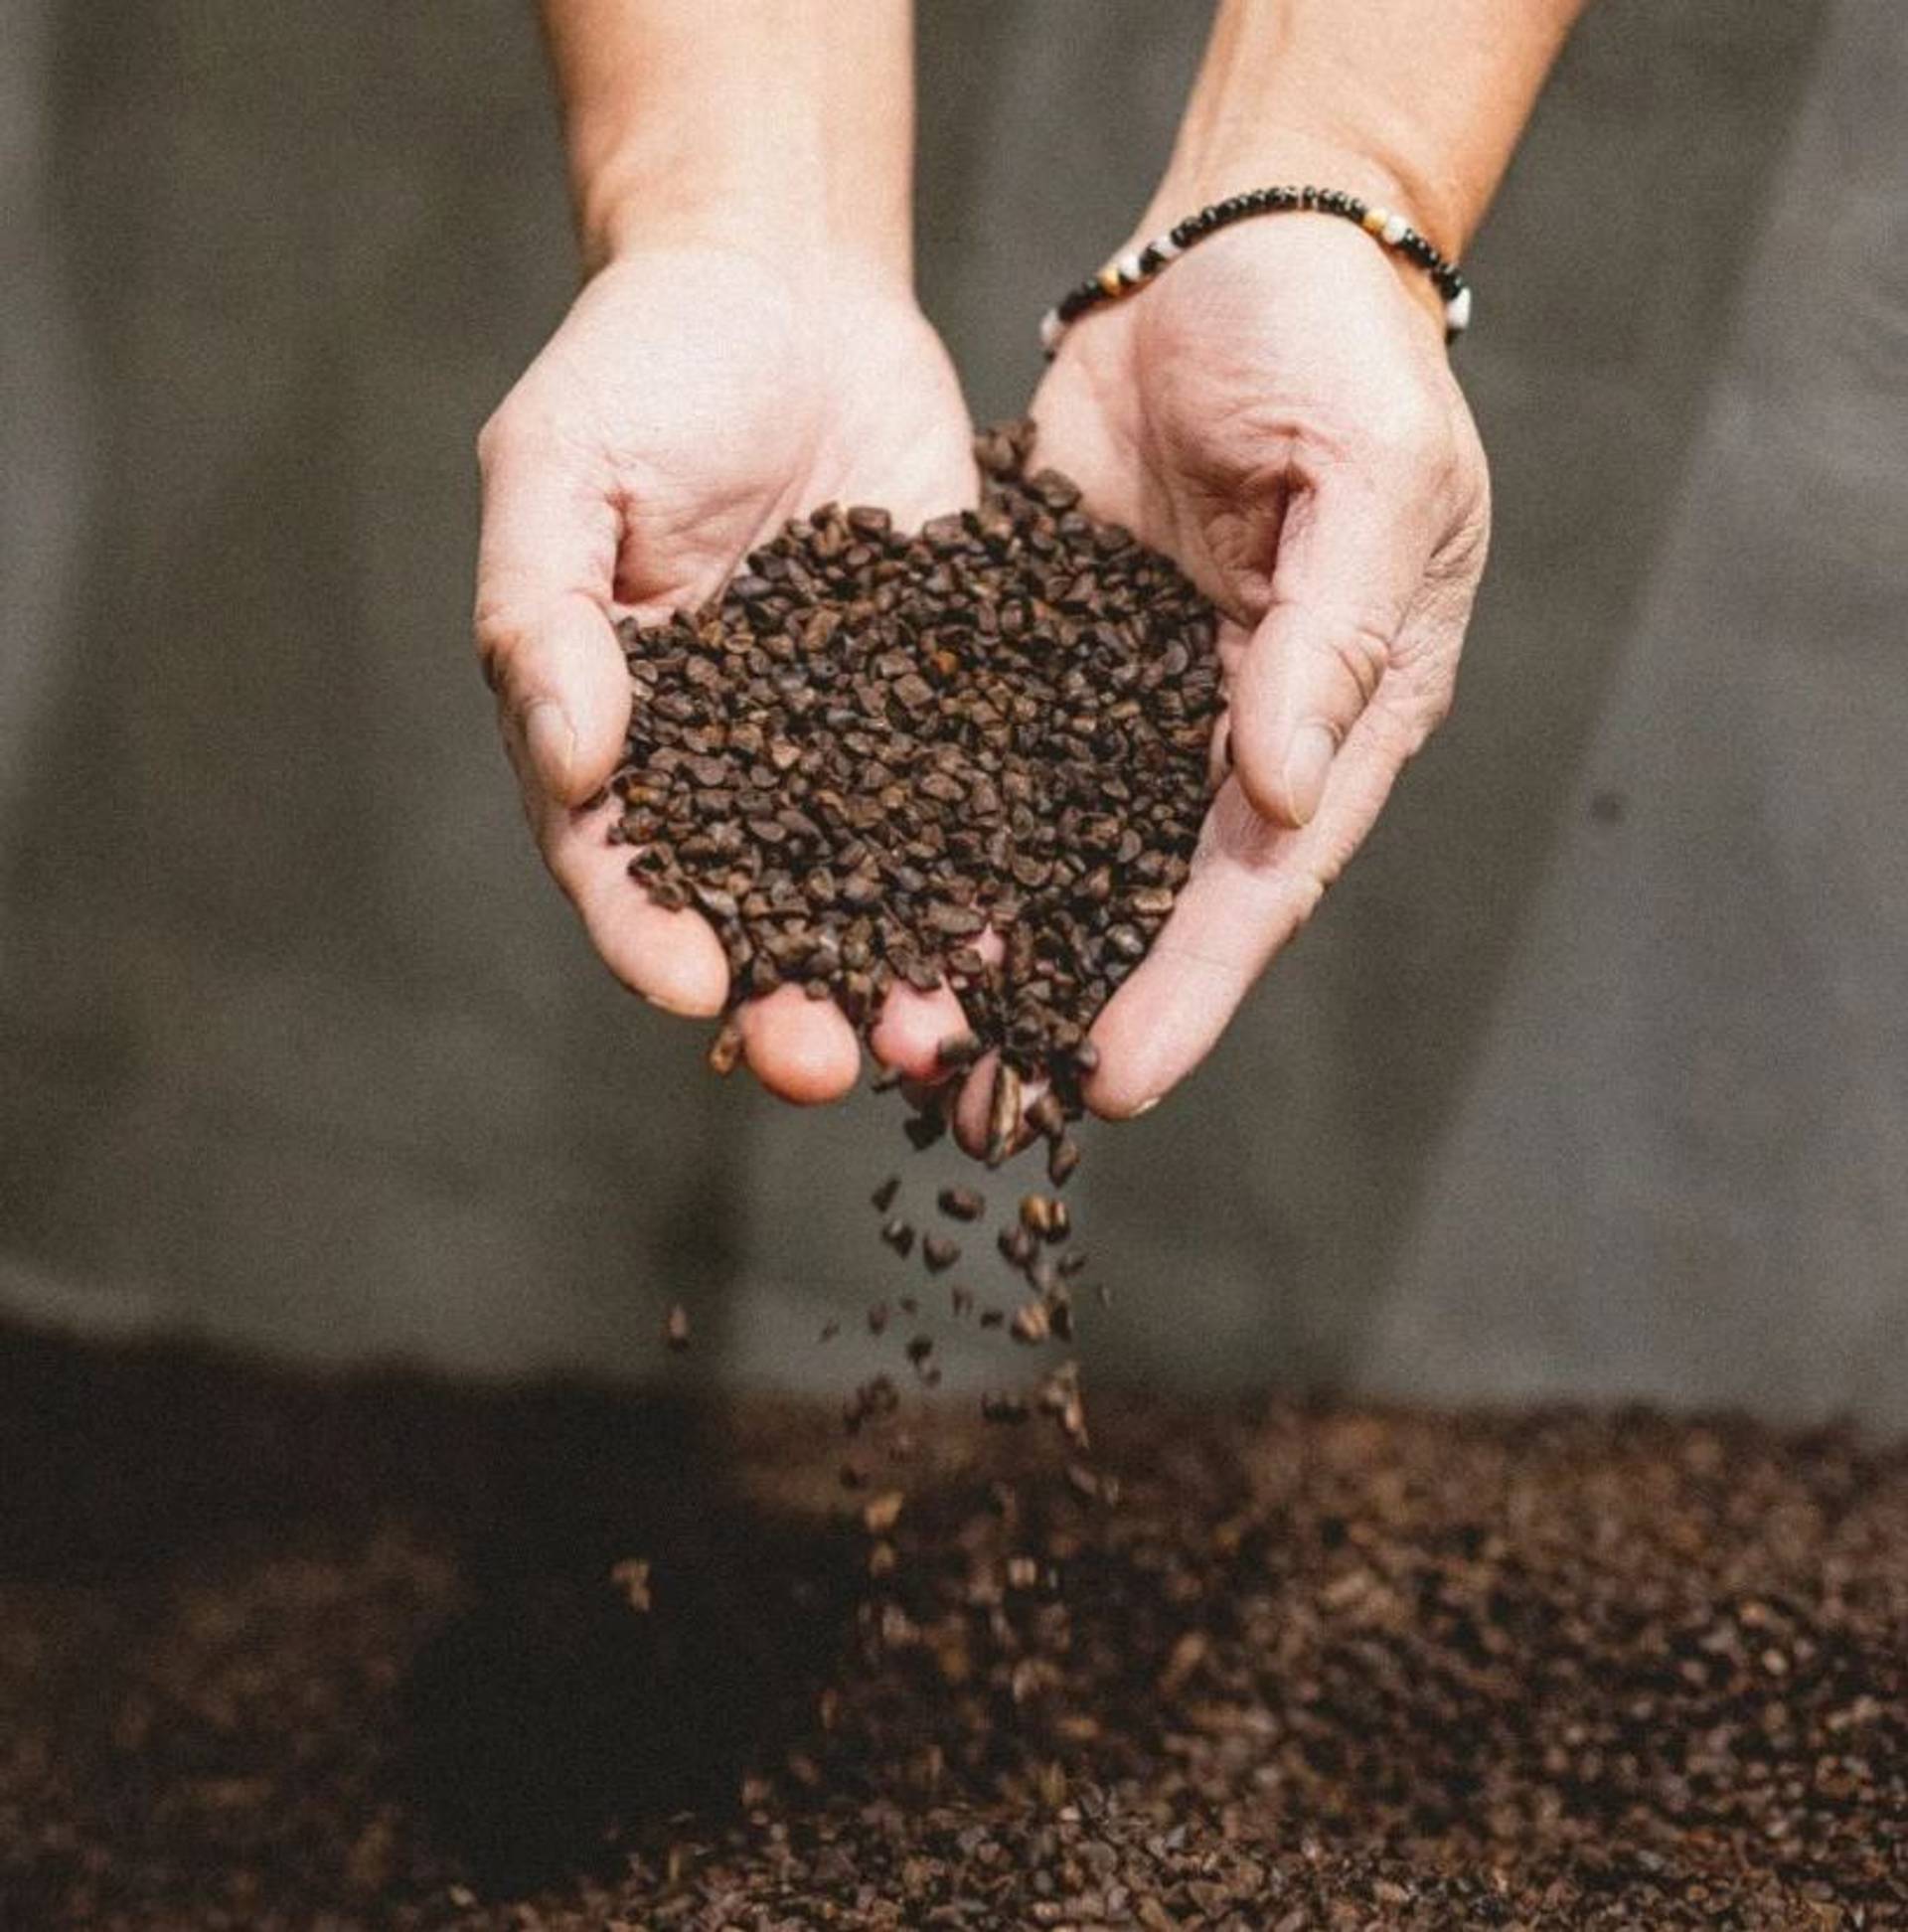 Upcycled beanless coffee engages eco-conscious drinkers